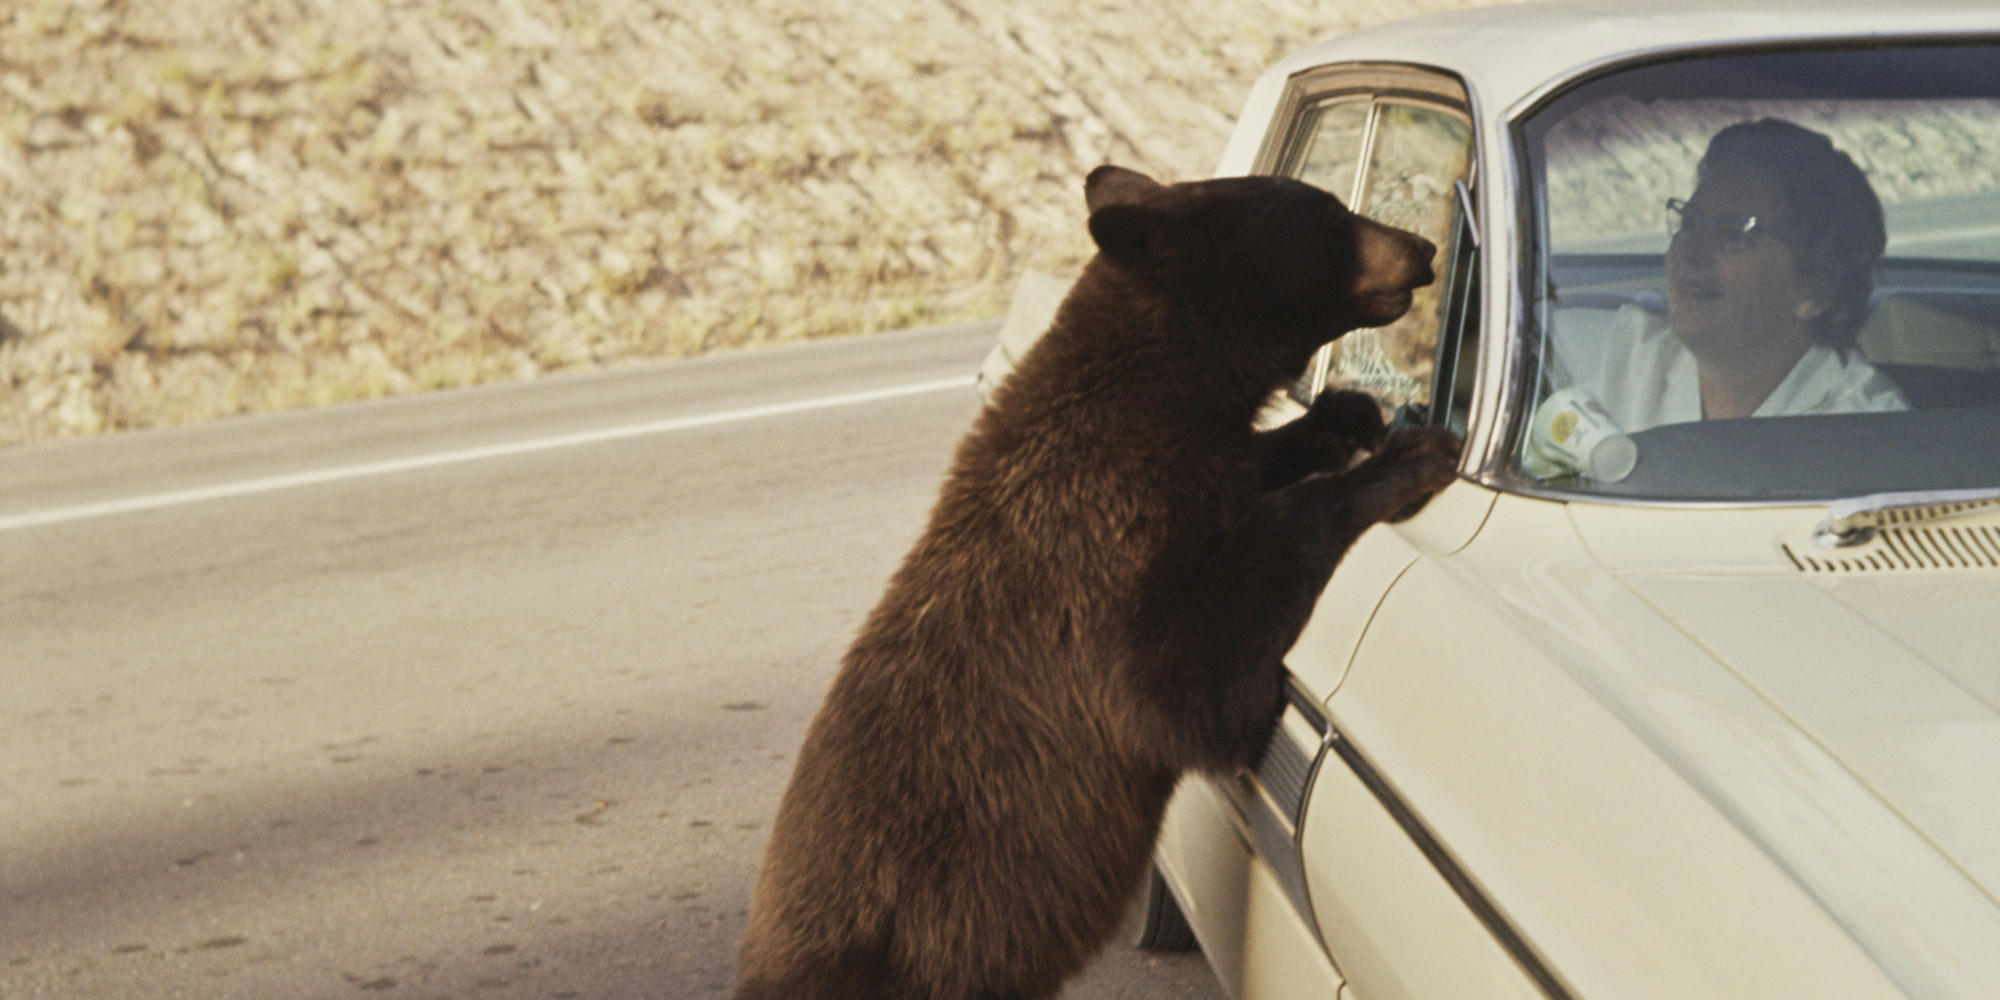 Hungry Bears Accidentally Locking Themselves In Cars, Say Truckee